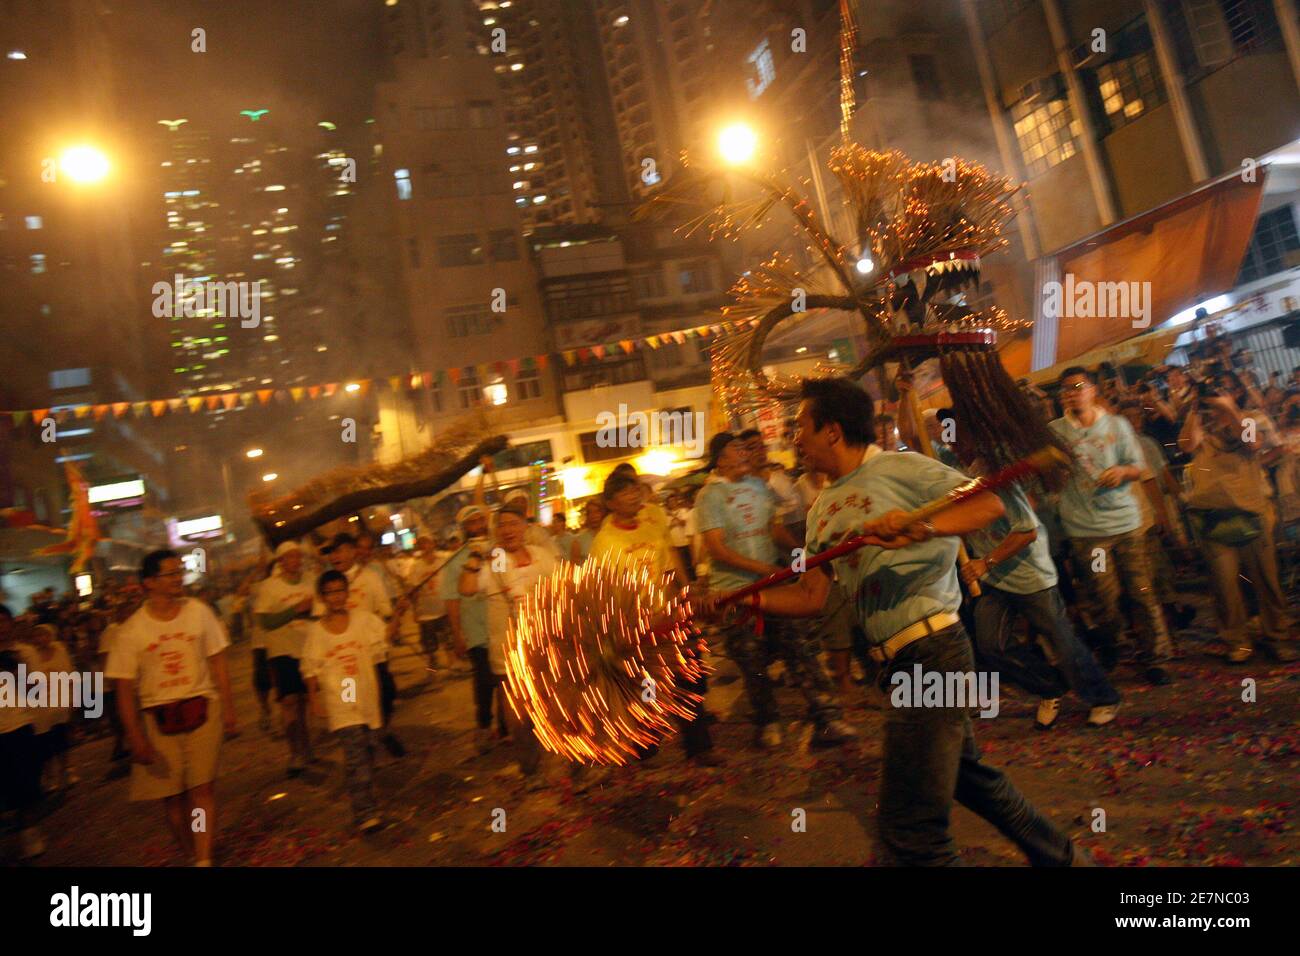 Participants manoeuvre a 'fire dragon' made of straw and covered with incense sticks during Mid-Autumn festival celebrations at Hong Kong's Tai Hang district October 2, 2009. The Mid-Autumn festival is on Saturday.  REUTERS/Tyrone Siu    (CHINA SOCIETY) Stock Photo